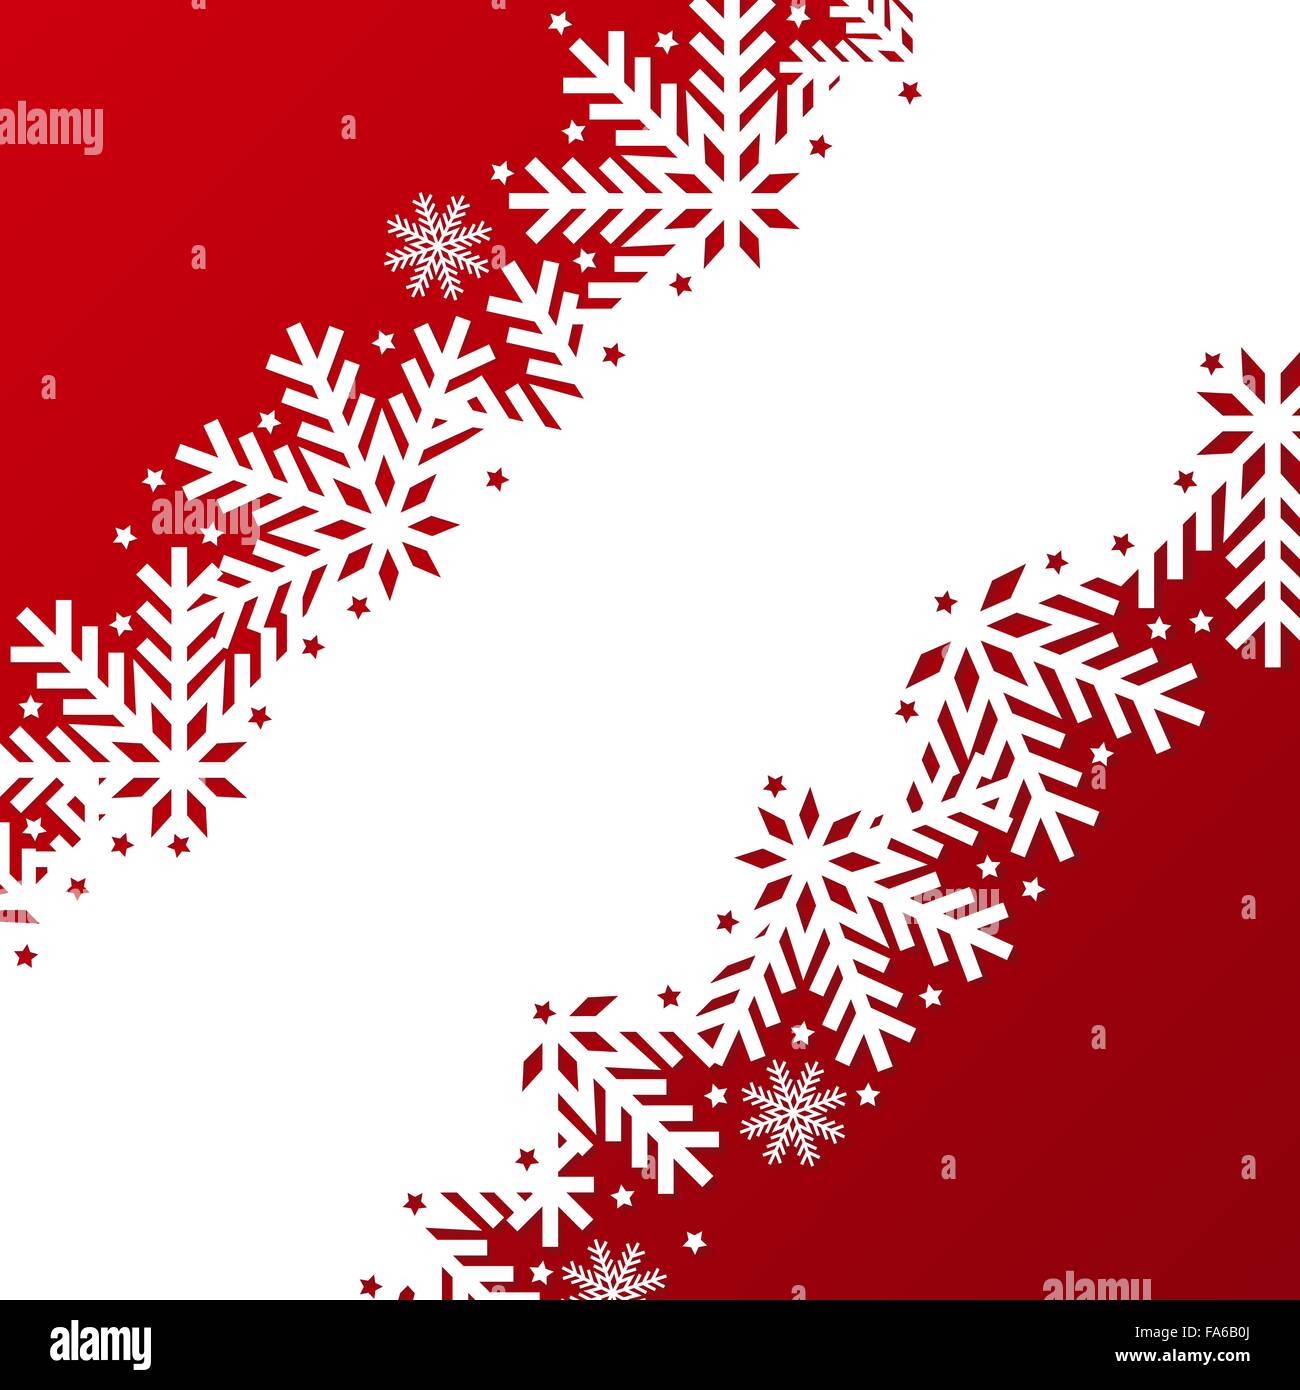 Abstract christmas background made of snowflakes and stars for your design Stock Vector